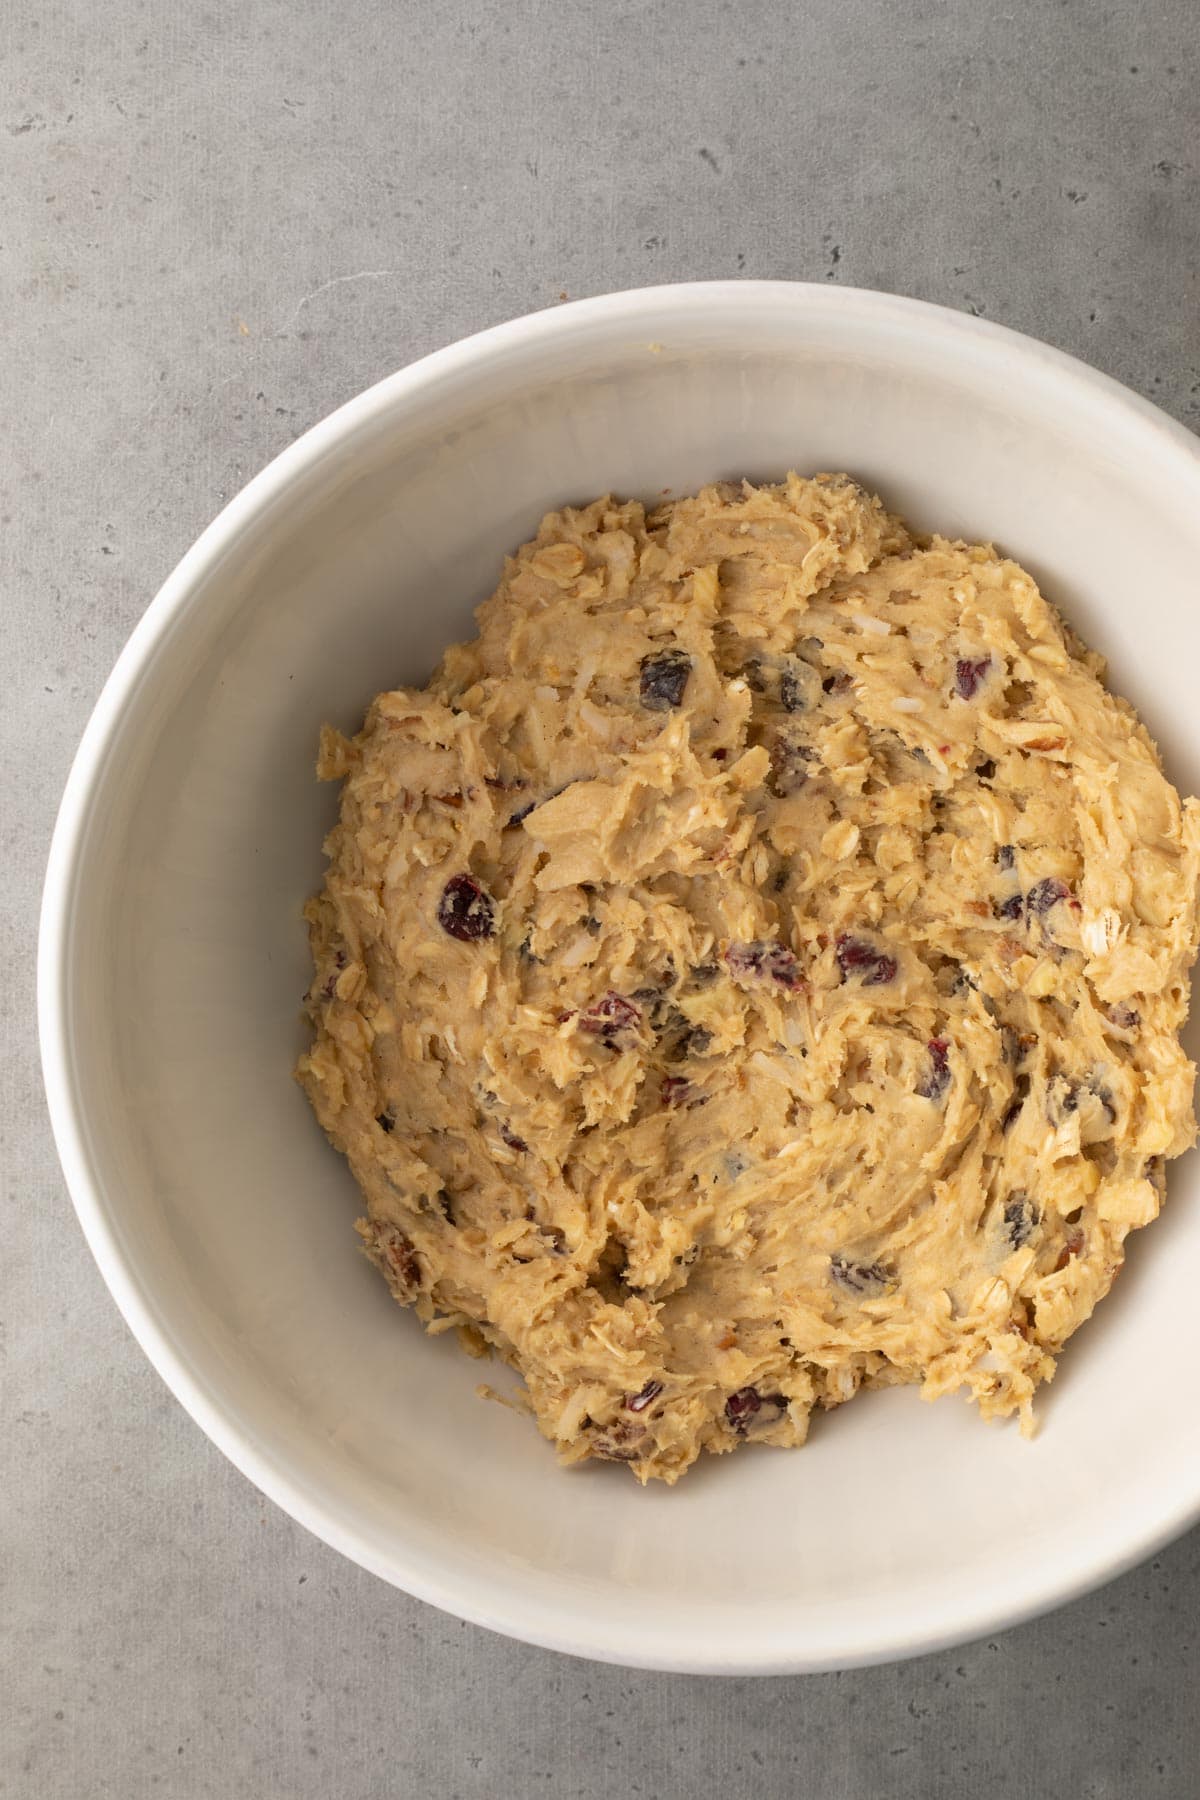 Breakfast Cookies dough in bowl after mixing